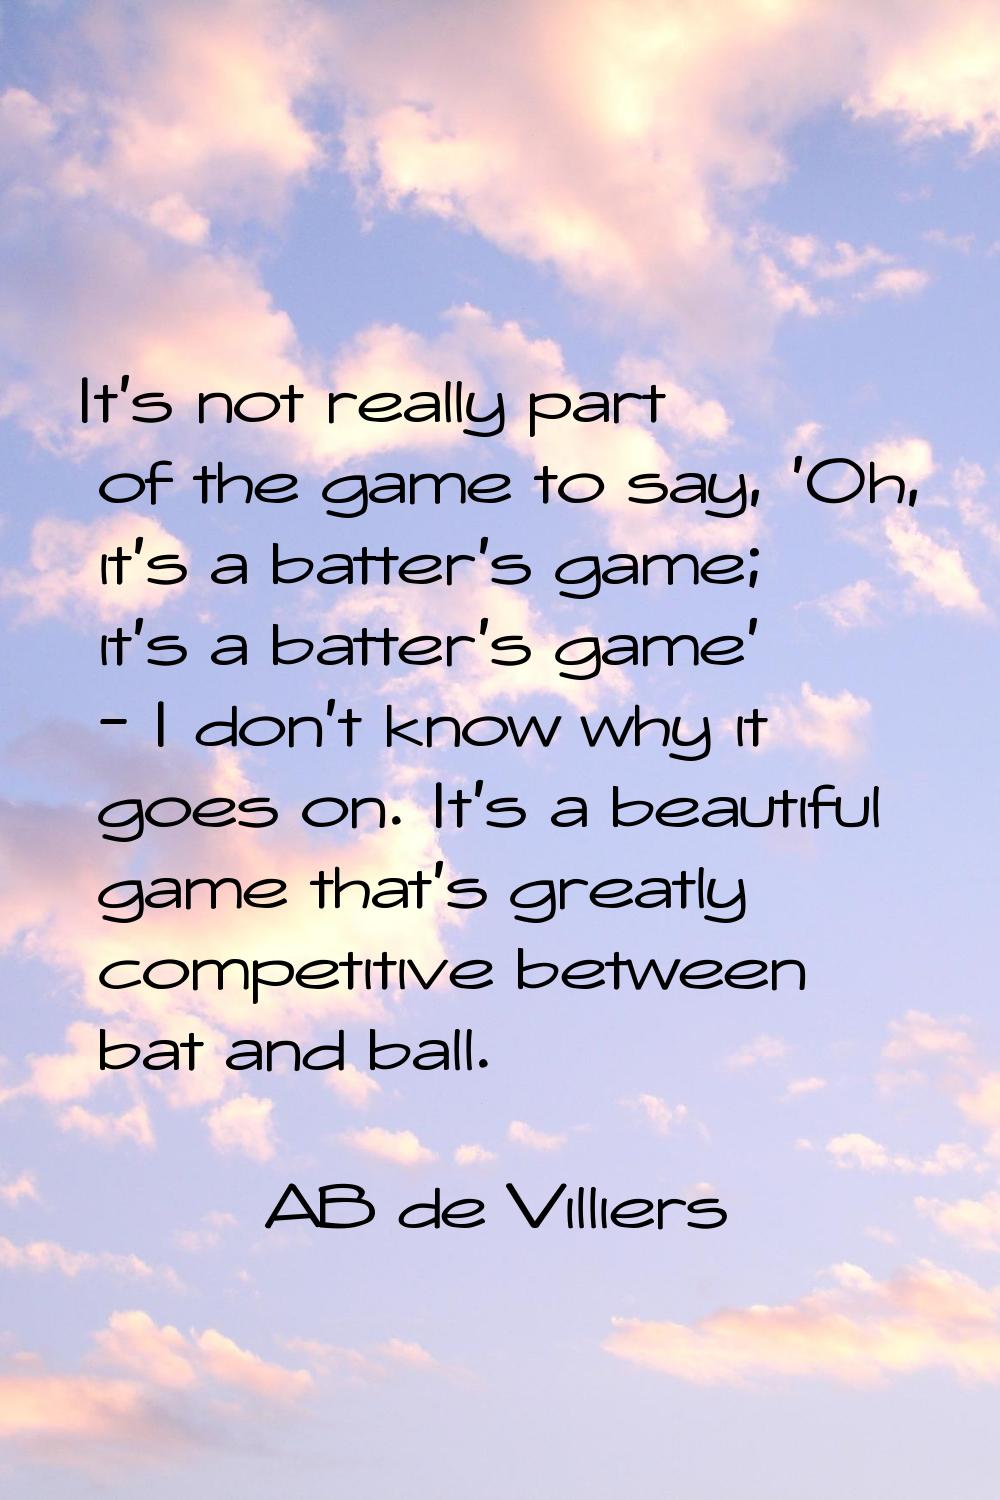 It's not really part of the game to say, 'Oh, it's a batter's game; it's a batter's game' - I don't